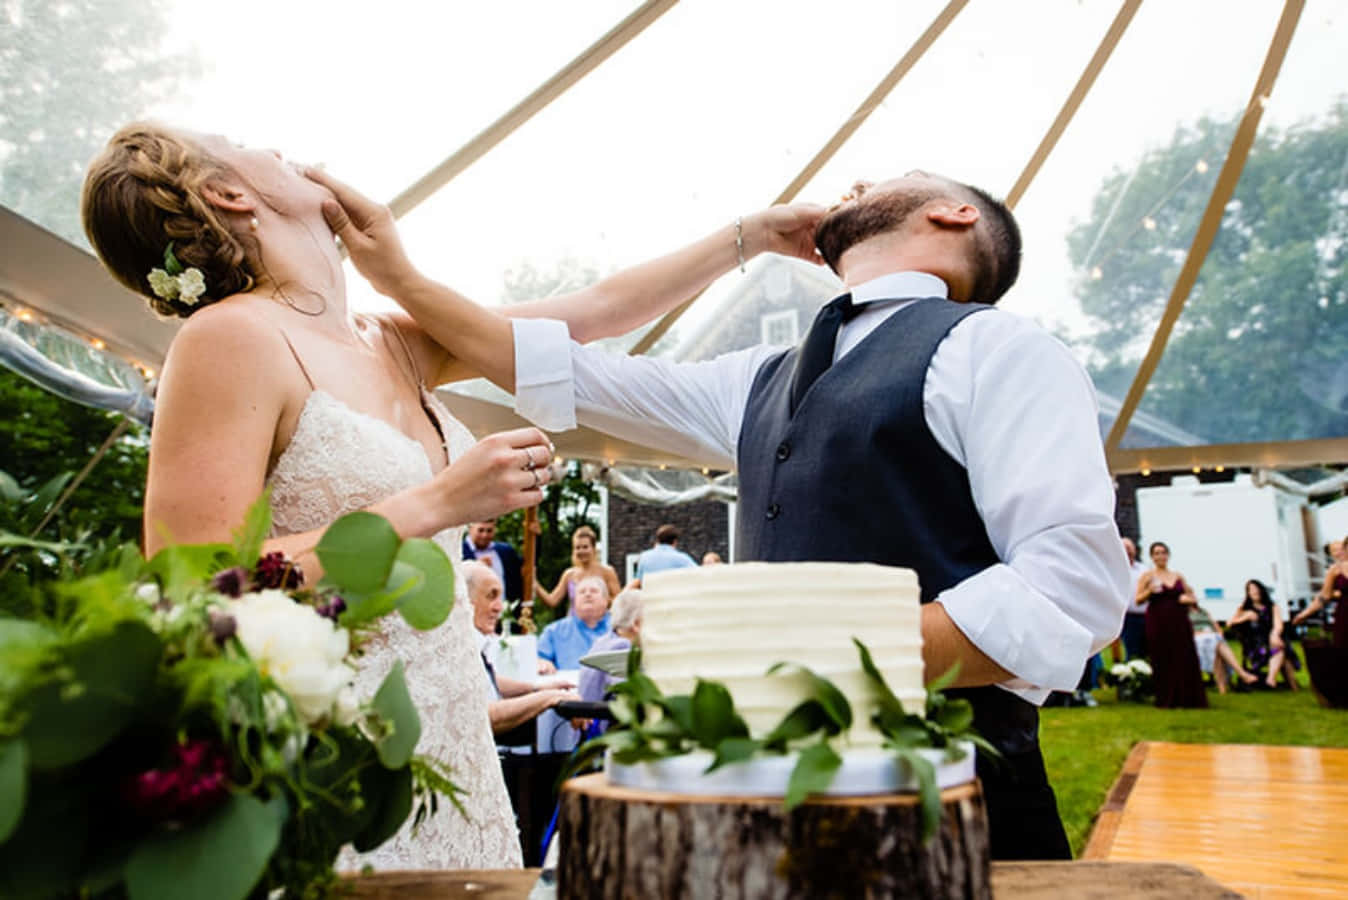 Bride and Groom Share a Moment of Laughter on Their Special Day